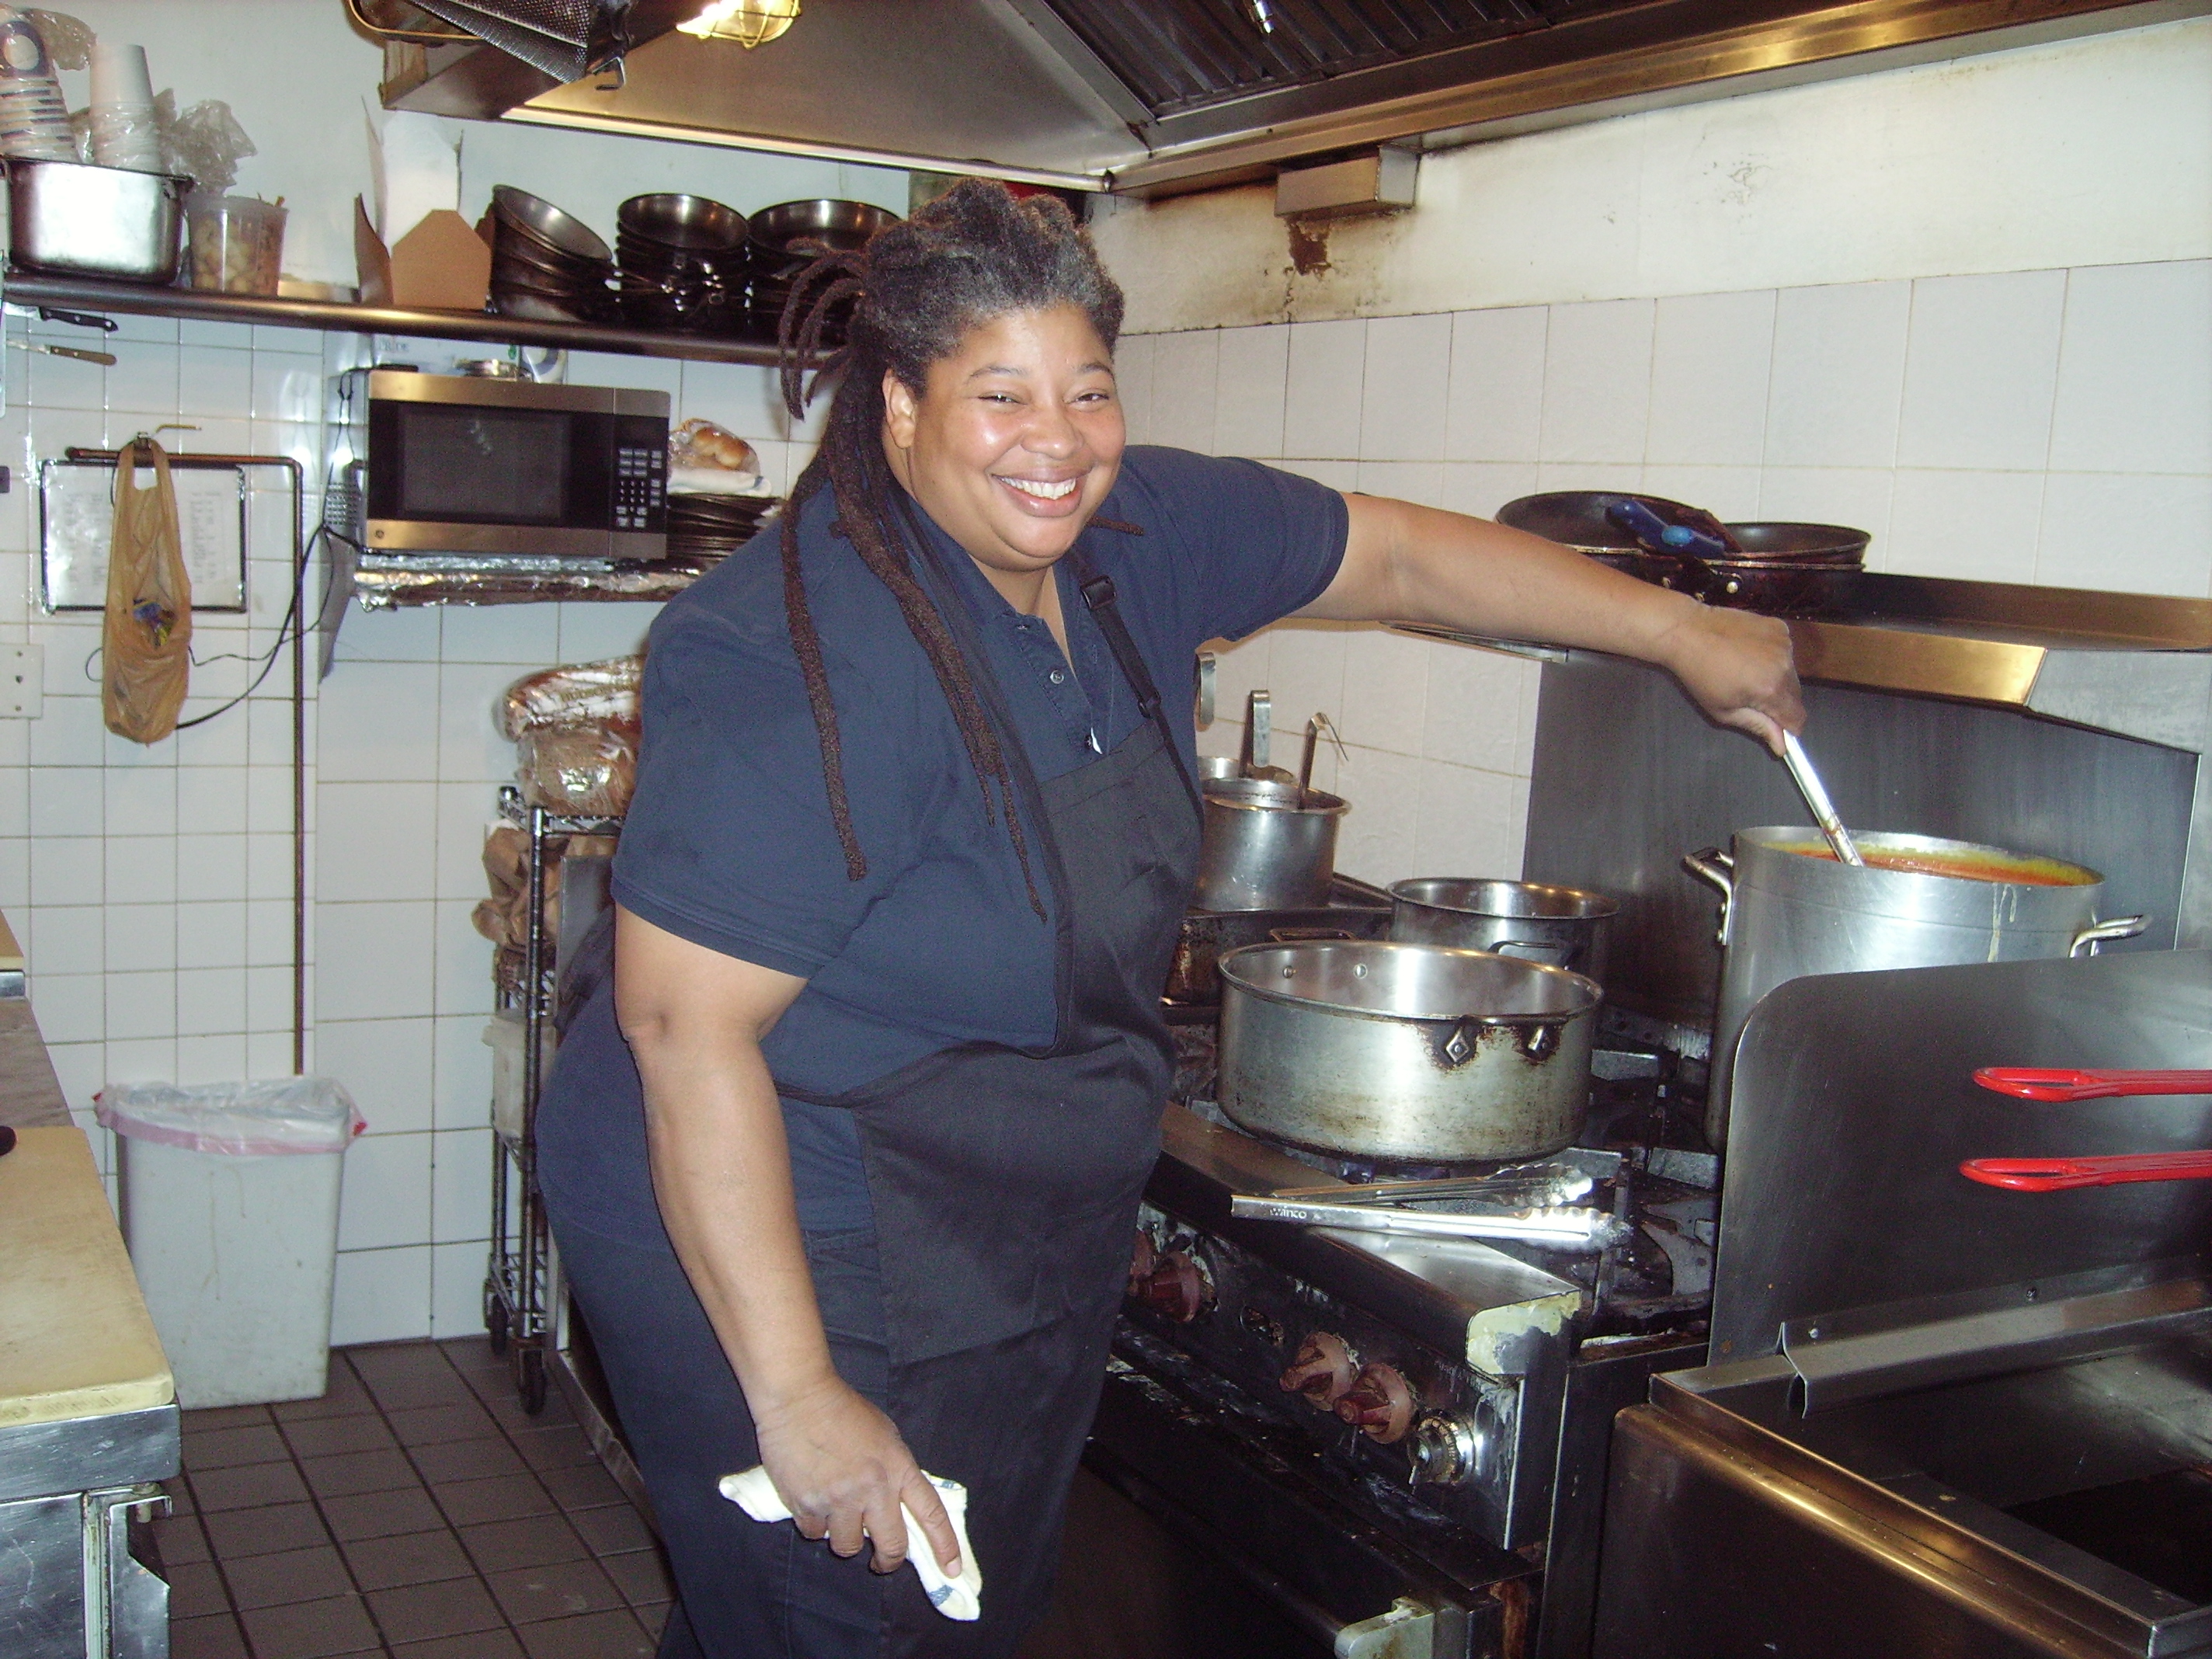 chef-cheryl-smith-cooking-in-her-kitchen-at-global-soul-restaurant-21.jpg 